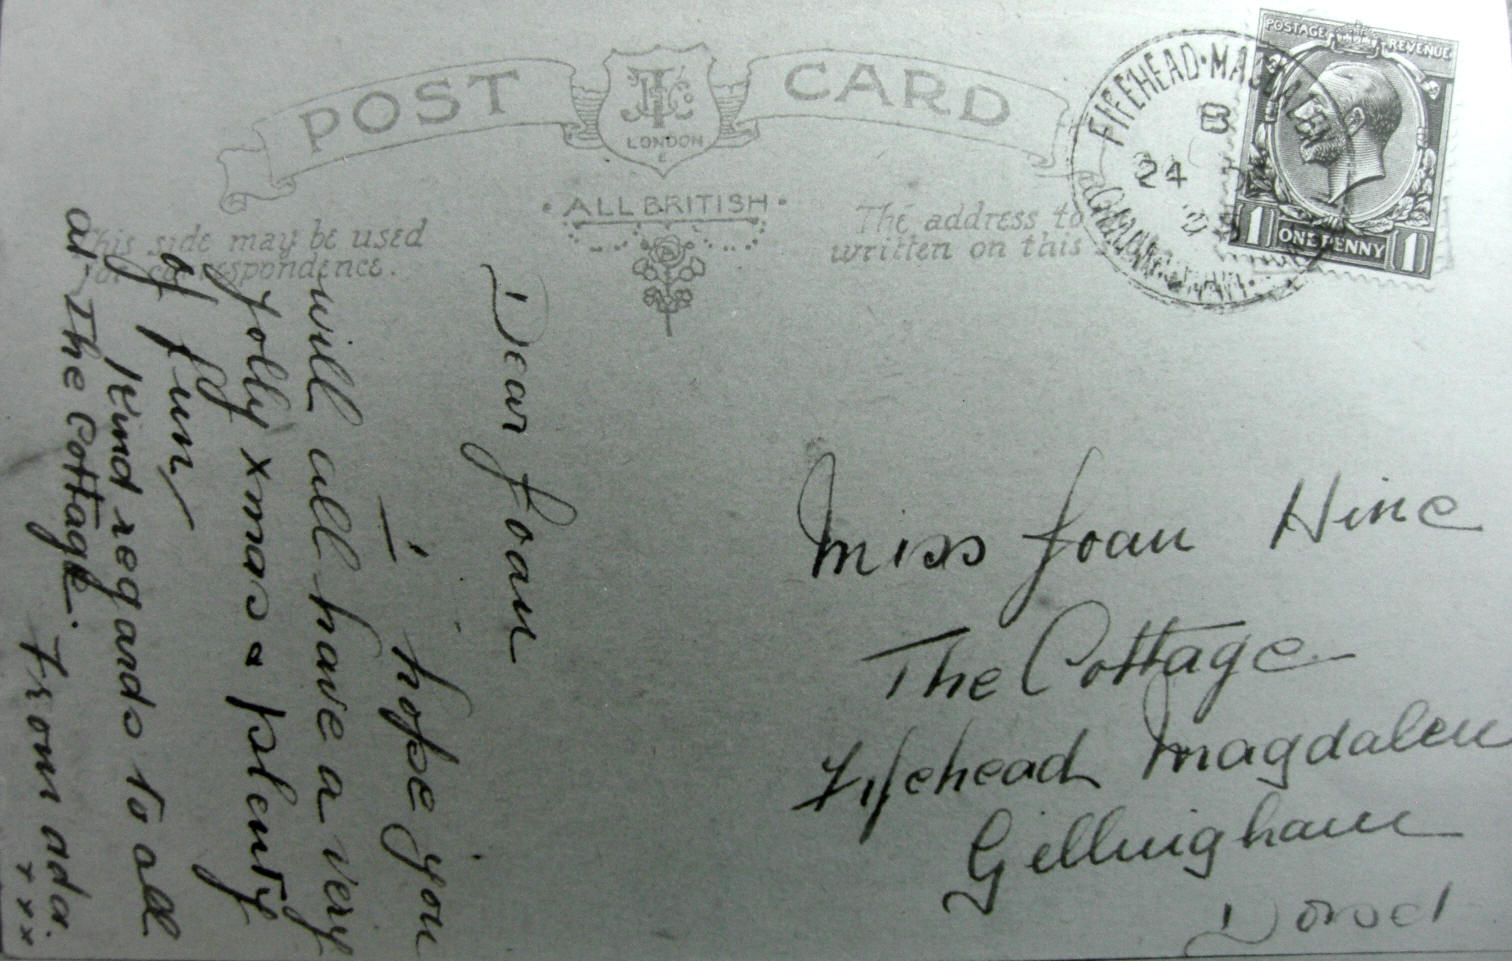 Christmas postcard stmped at Fifead Post Office 24 December